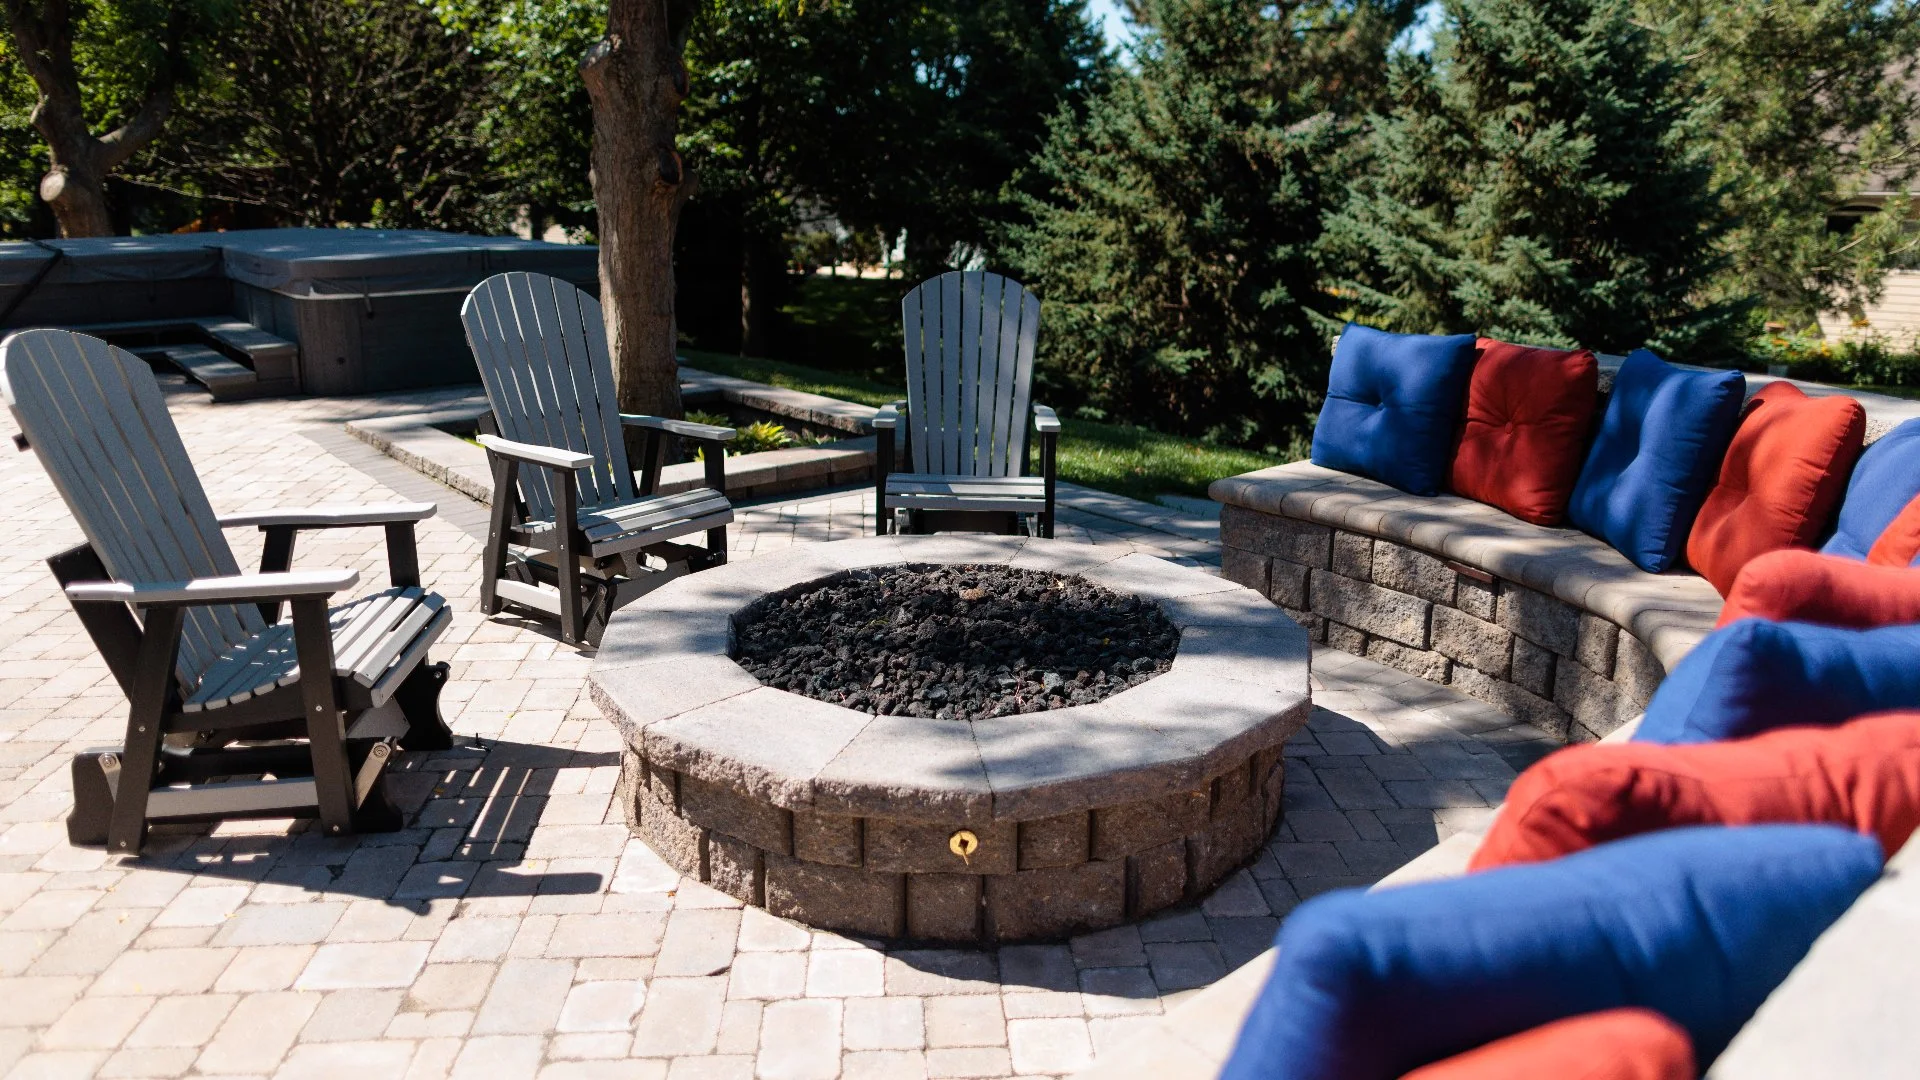 Should I Build a Fire Pit or an Outdoor Fireplace on My Property?